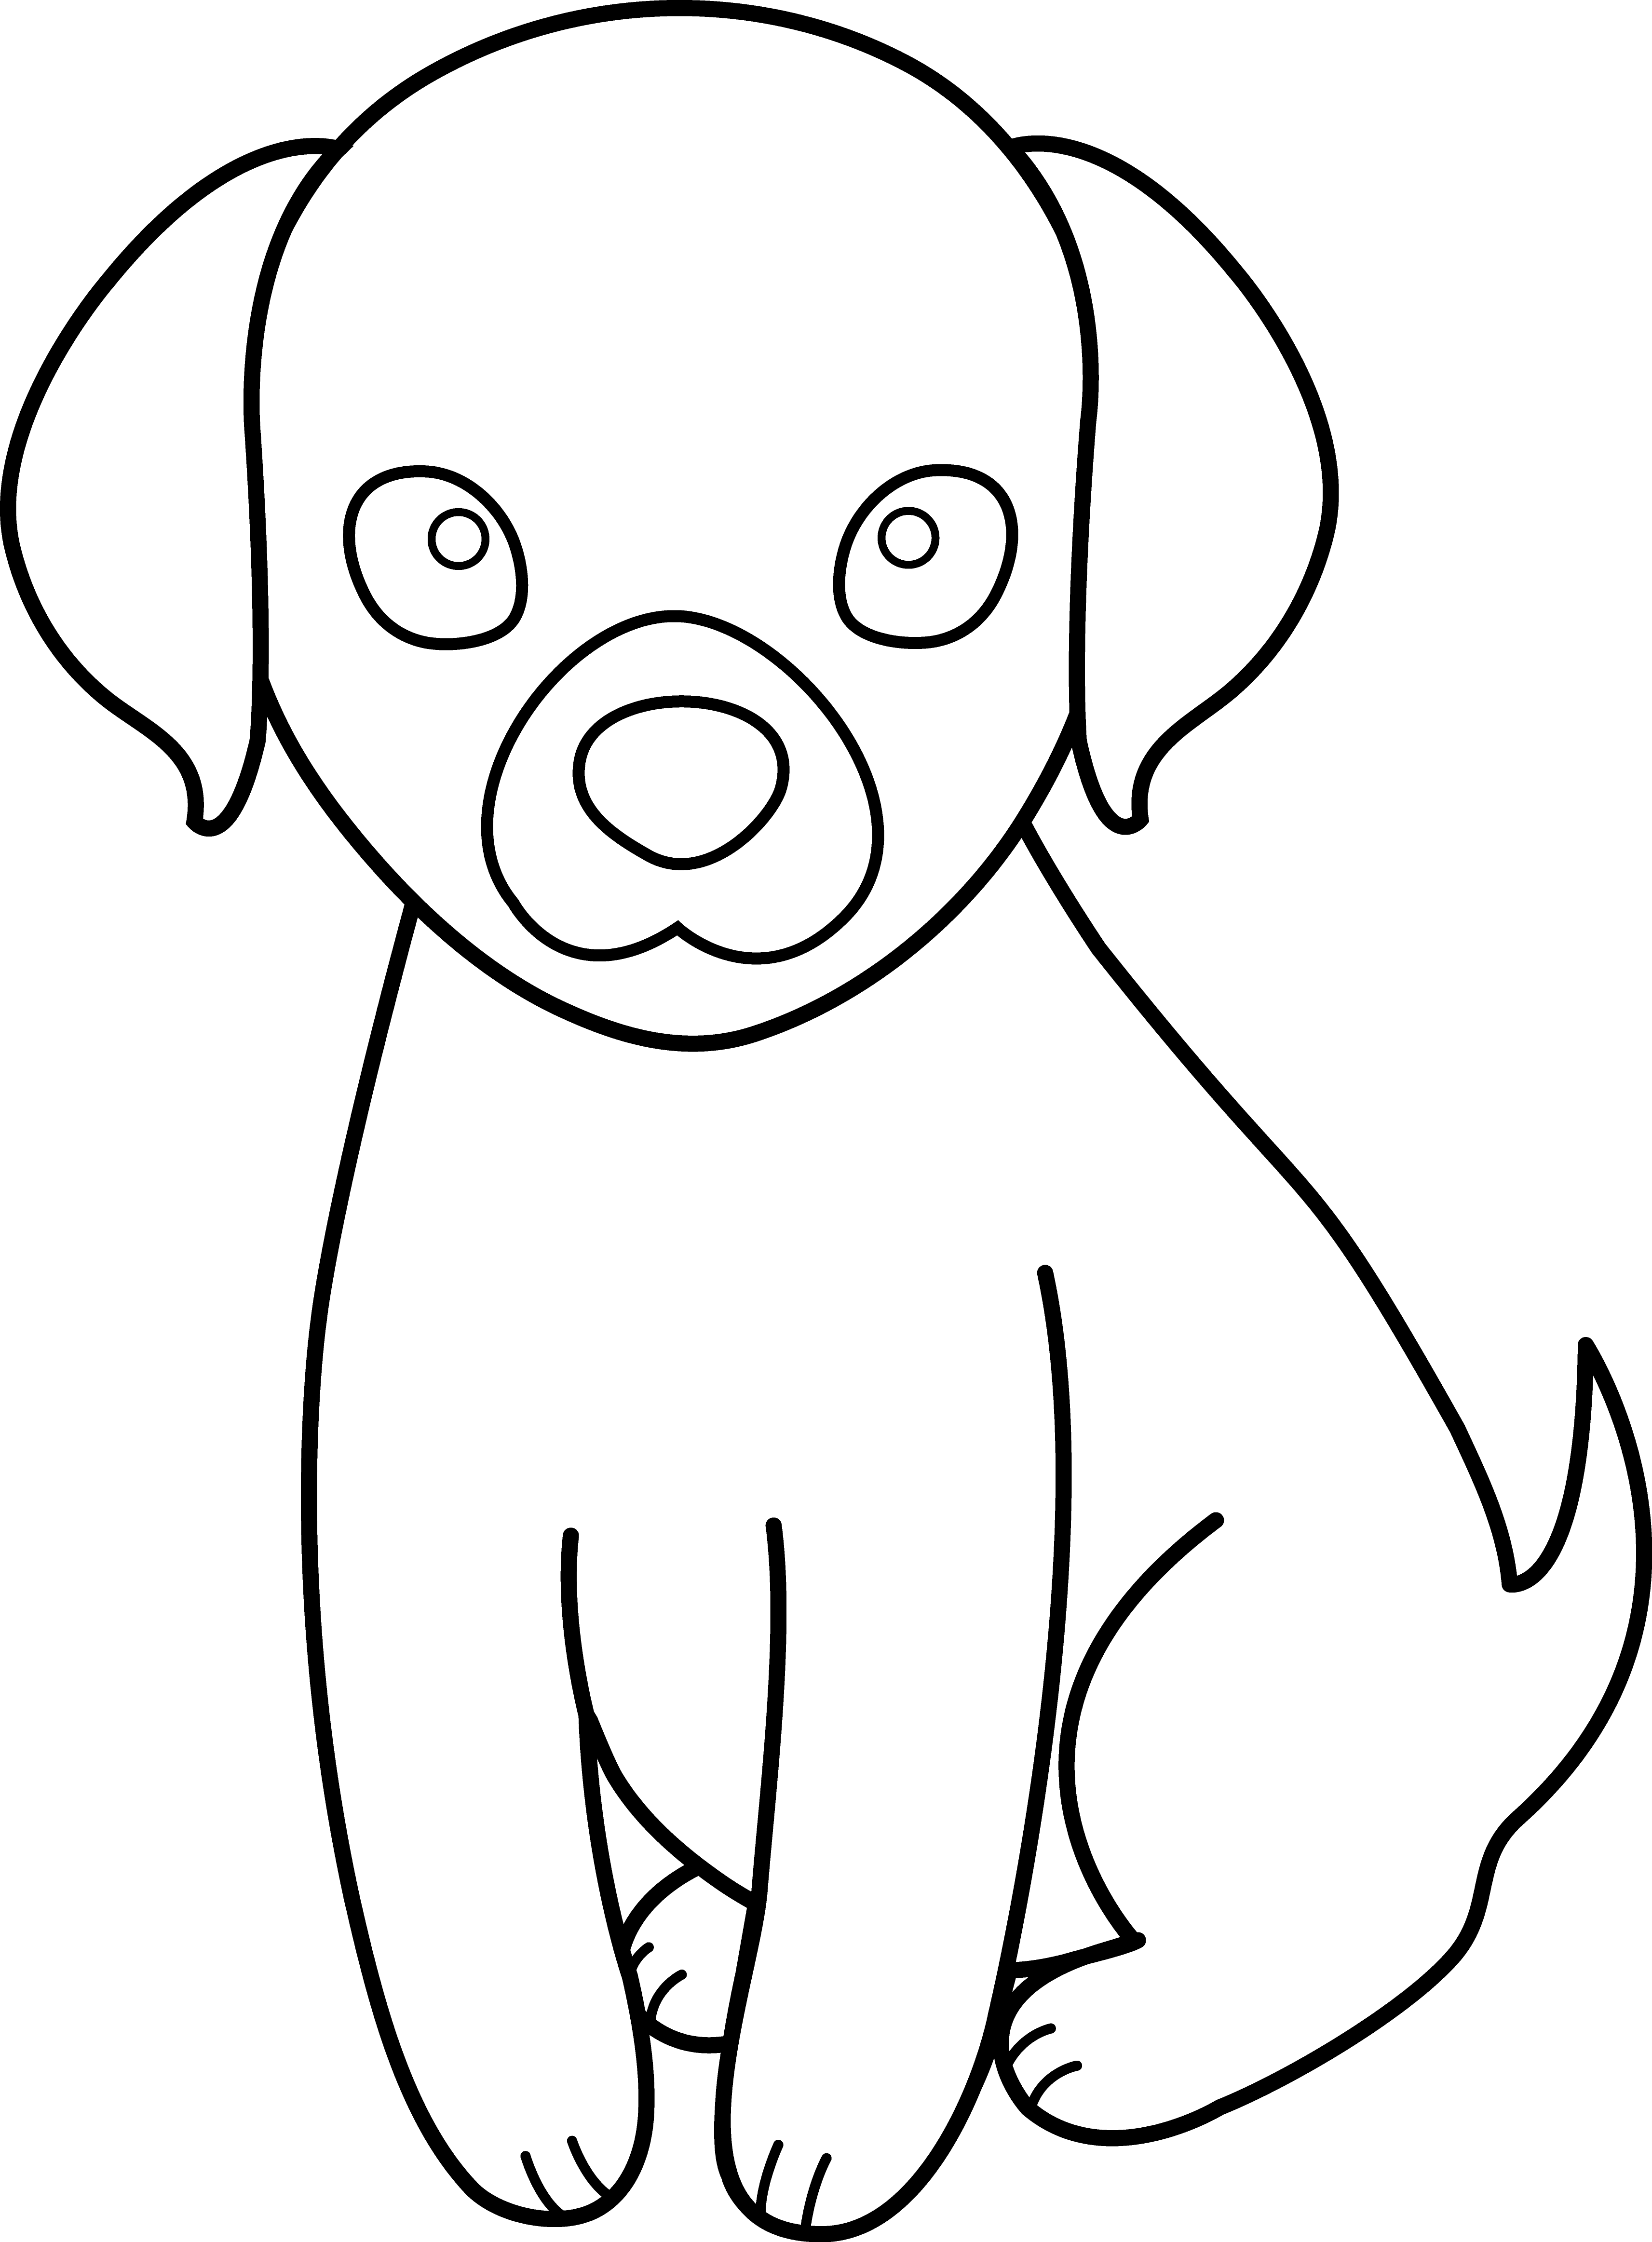 clipart dog outline - photo #49